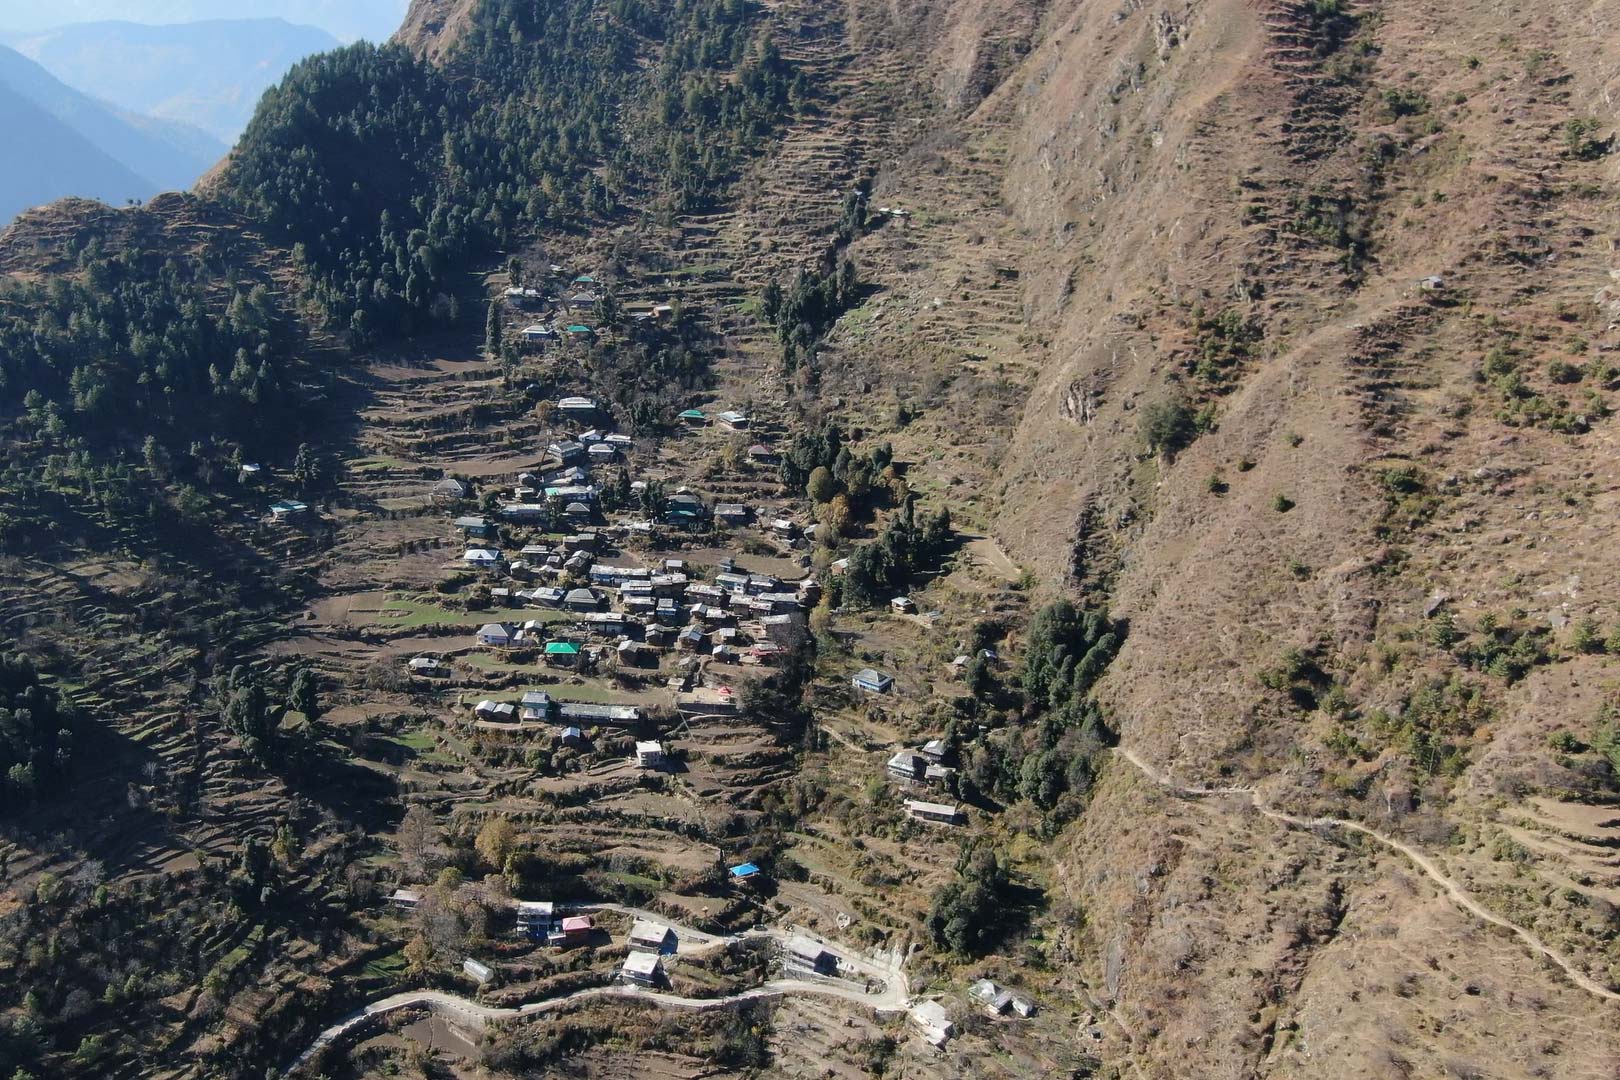 The funds go towards planting and maintaining the trees, which is carried outby the local community. Pictured is an eroded hillside, before it was partially reforested in October 2020. Photo from Himalayan Ecotourism